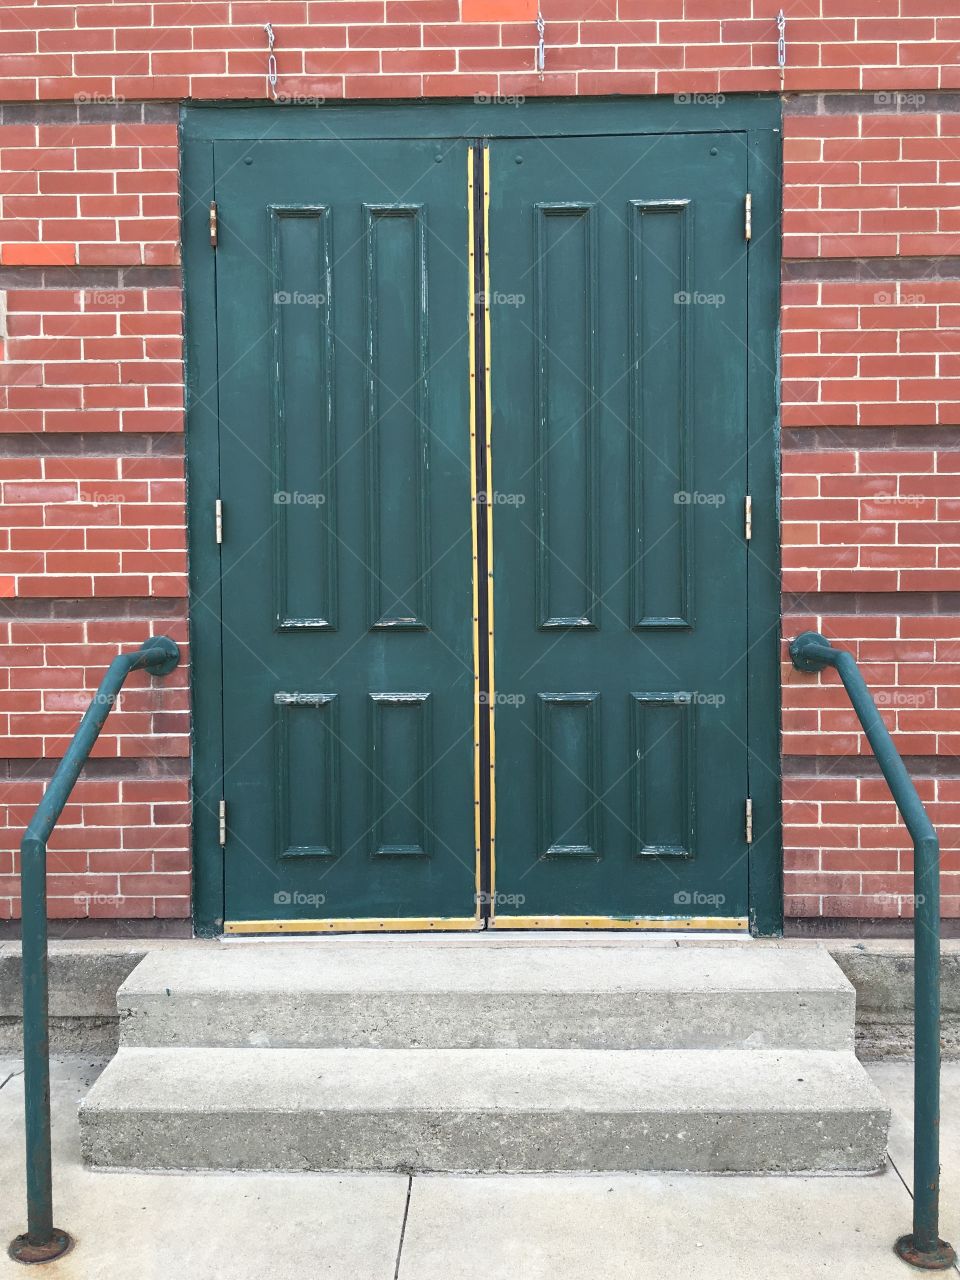 Doors to an old theater built around 1910.